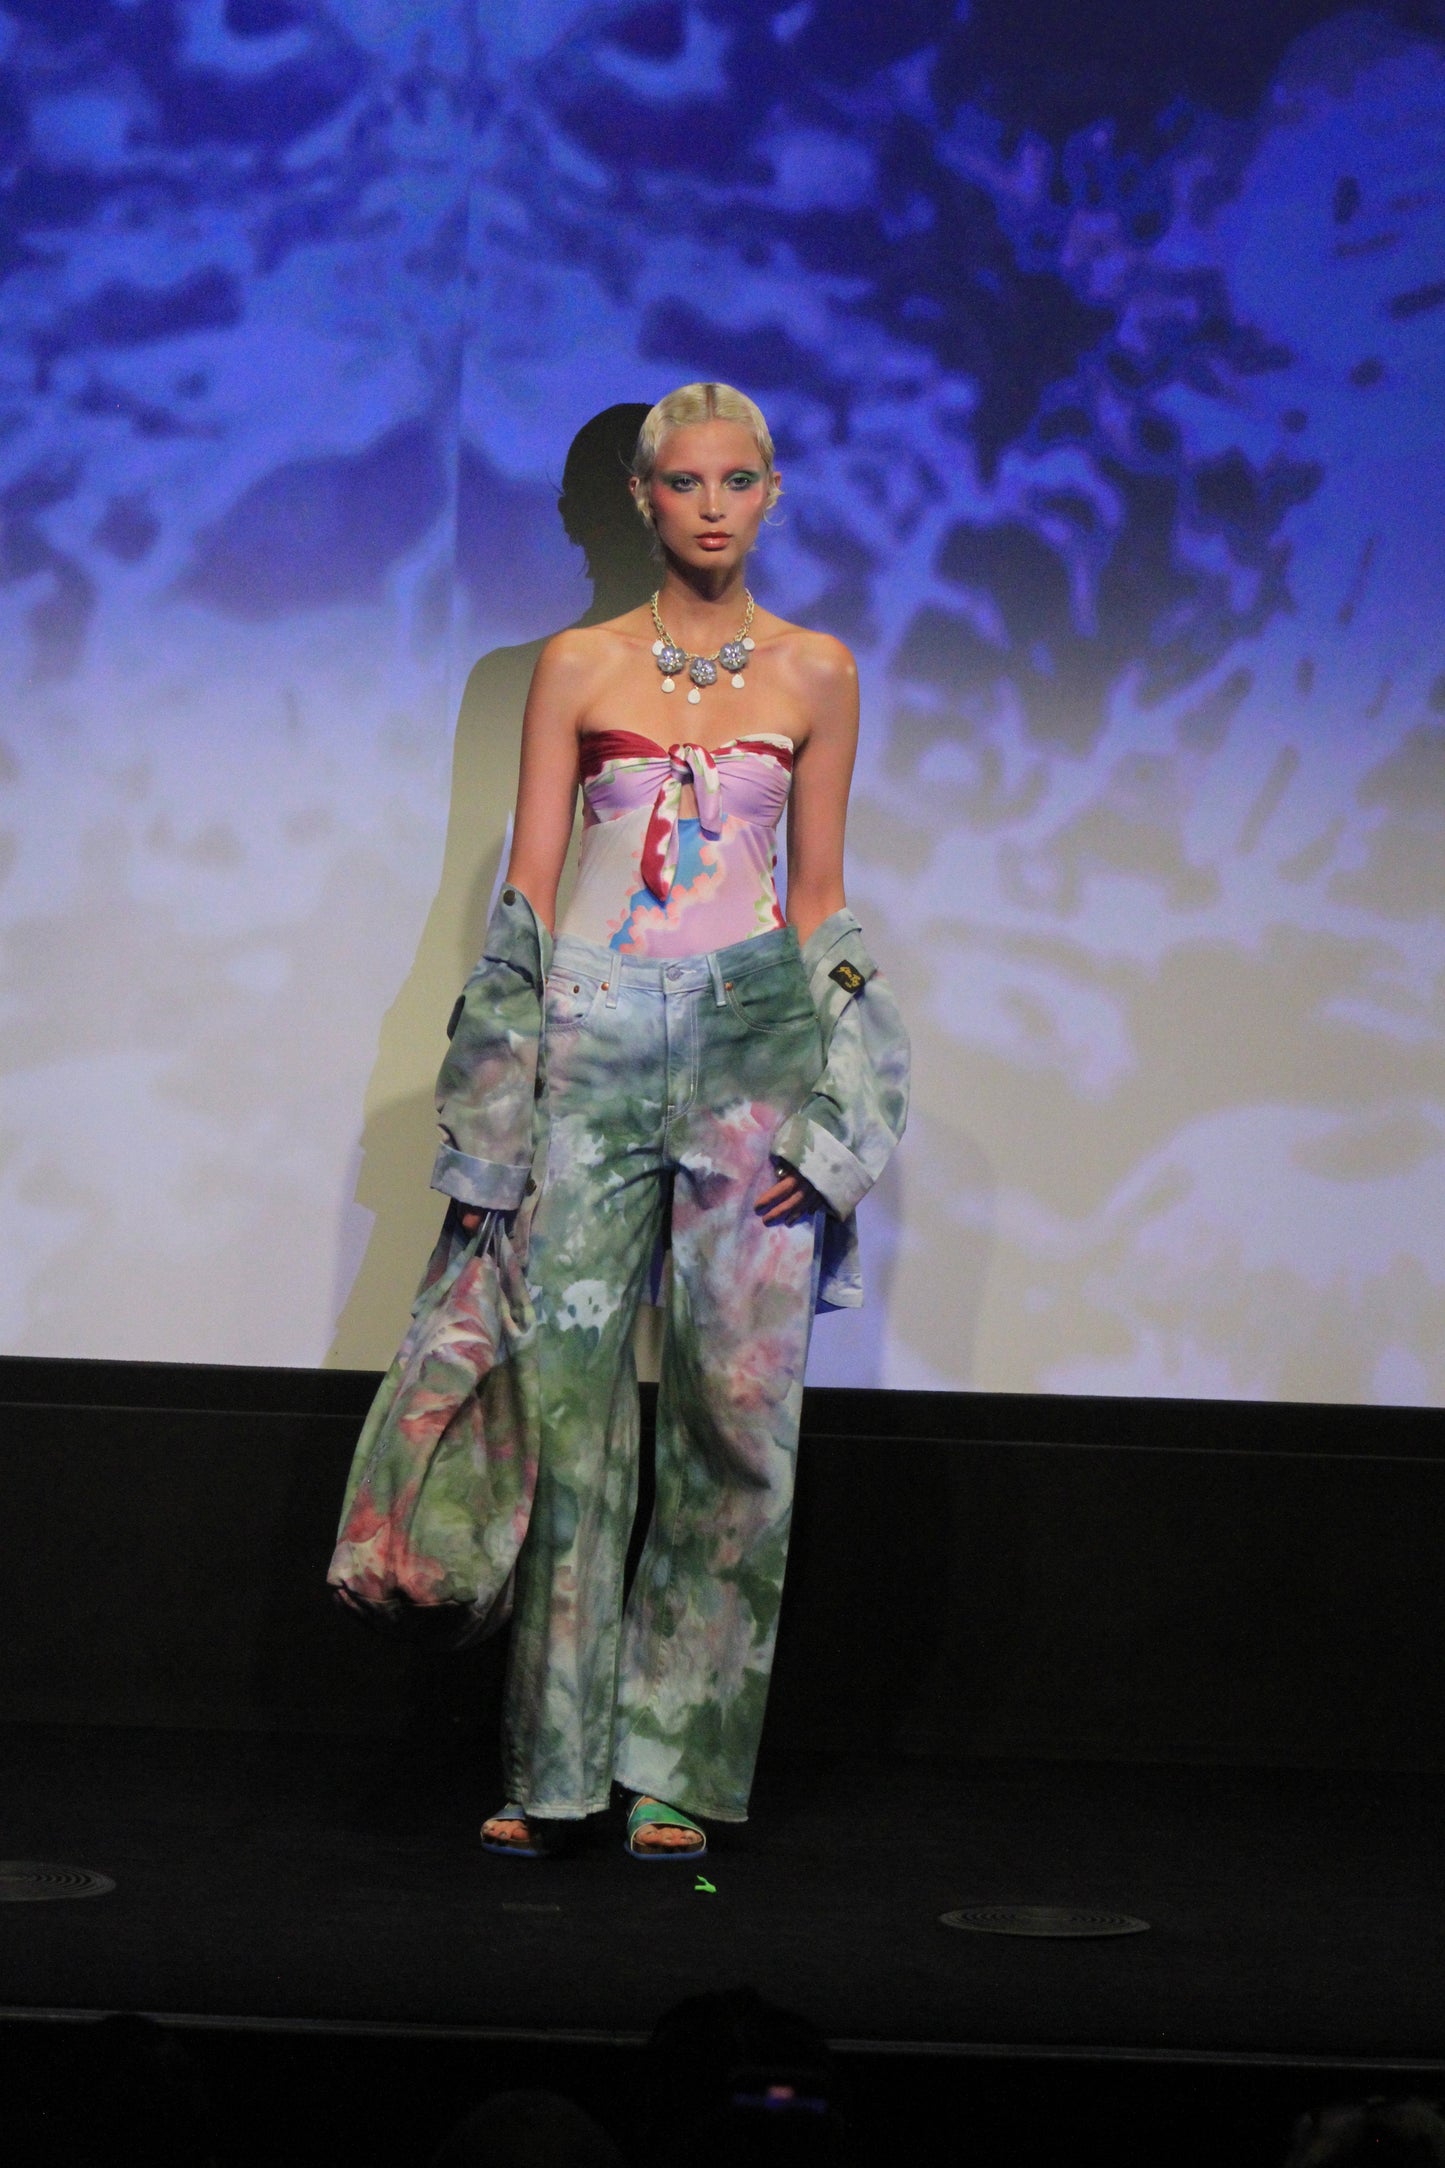 Under runway lights, Ocean Tie Dye Jacket, green floral design with touch of pink.